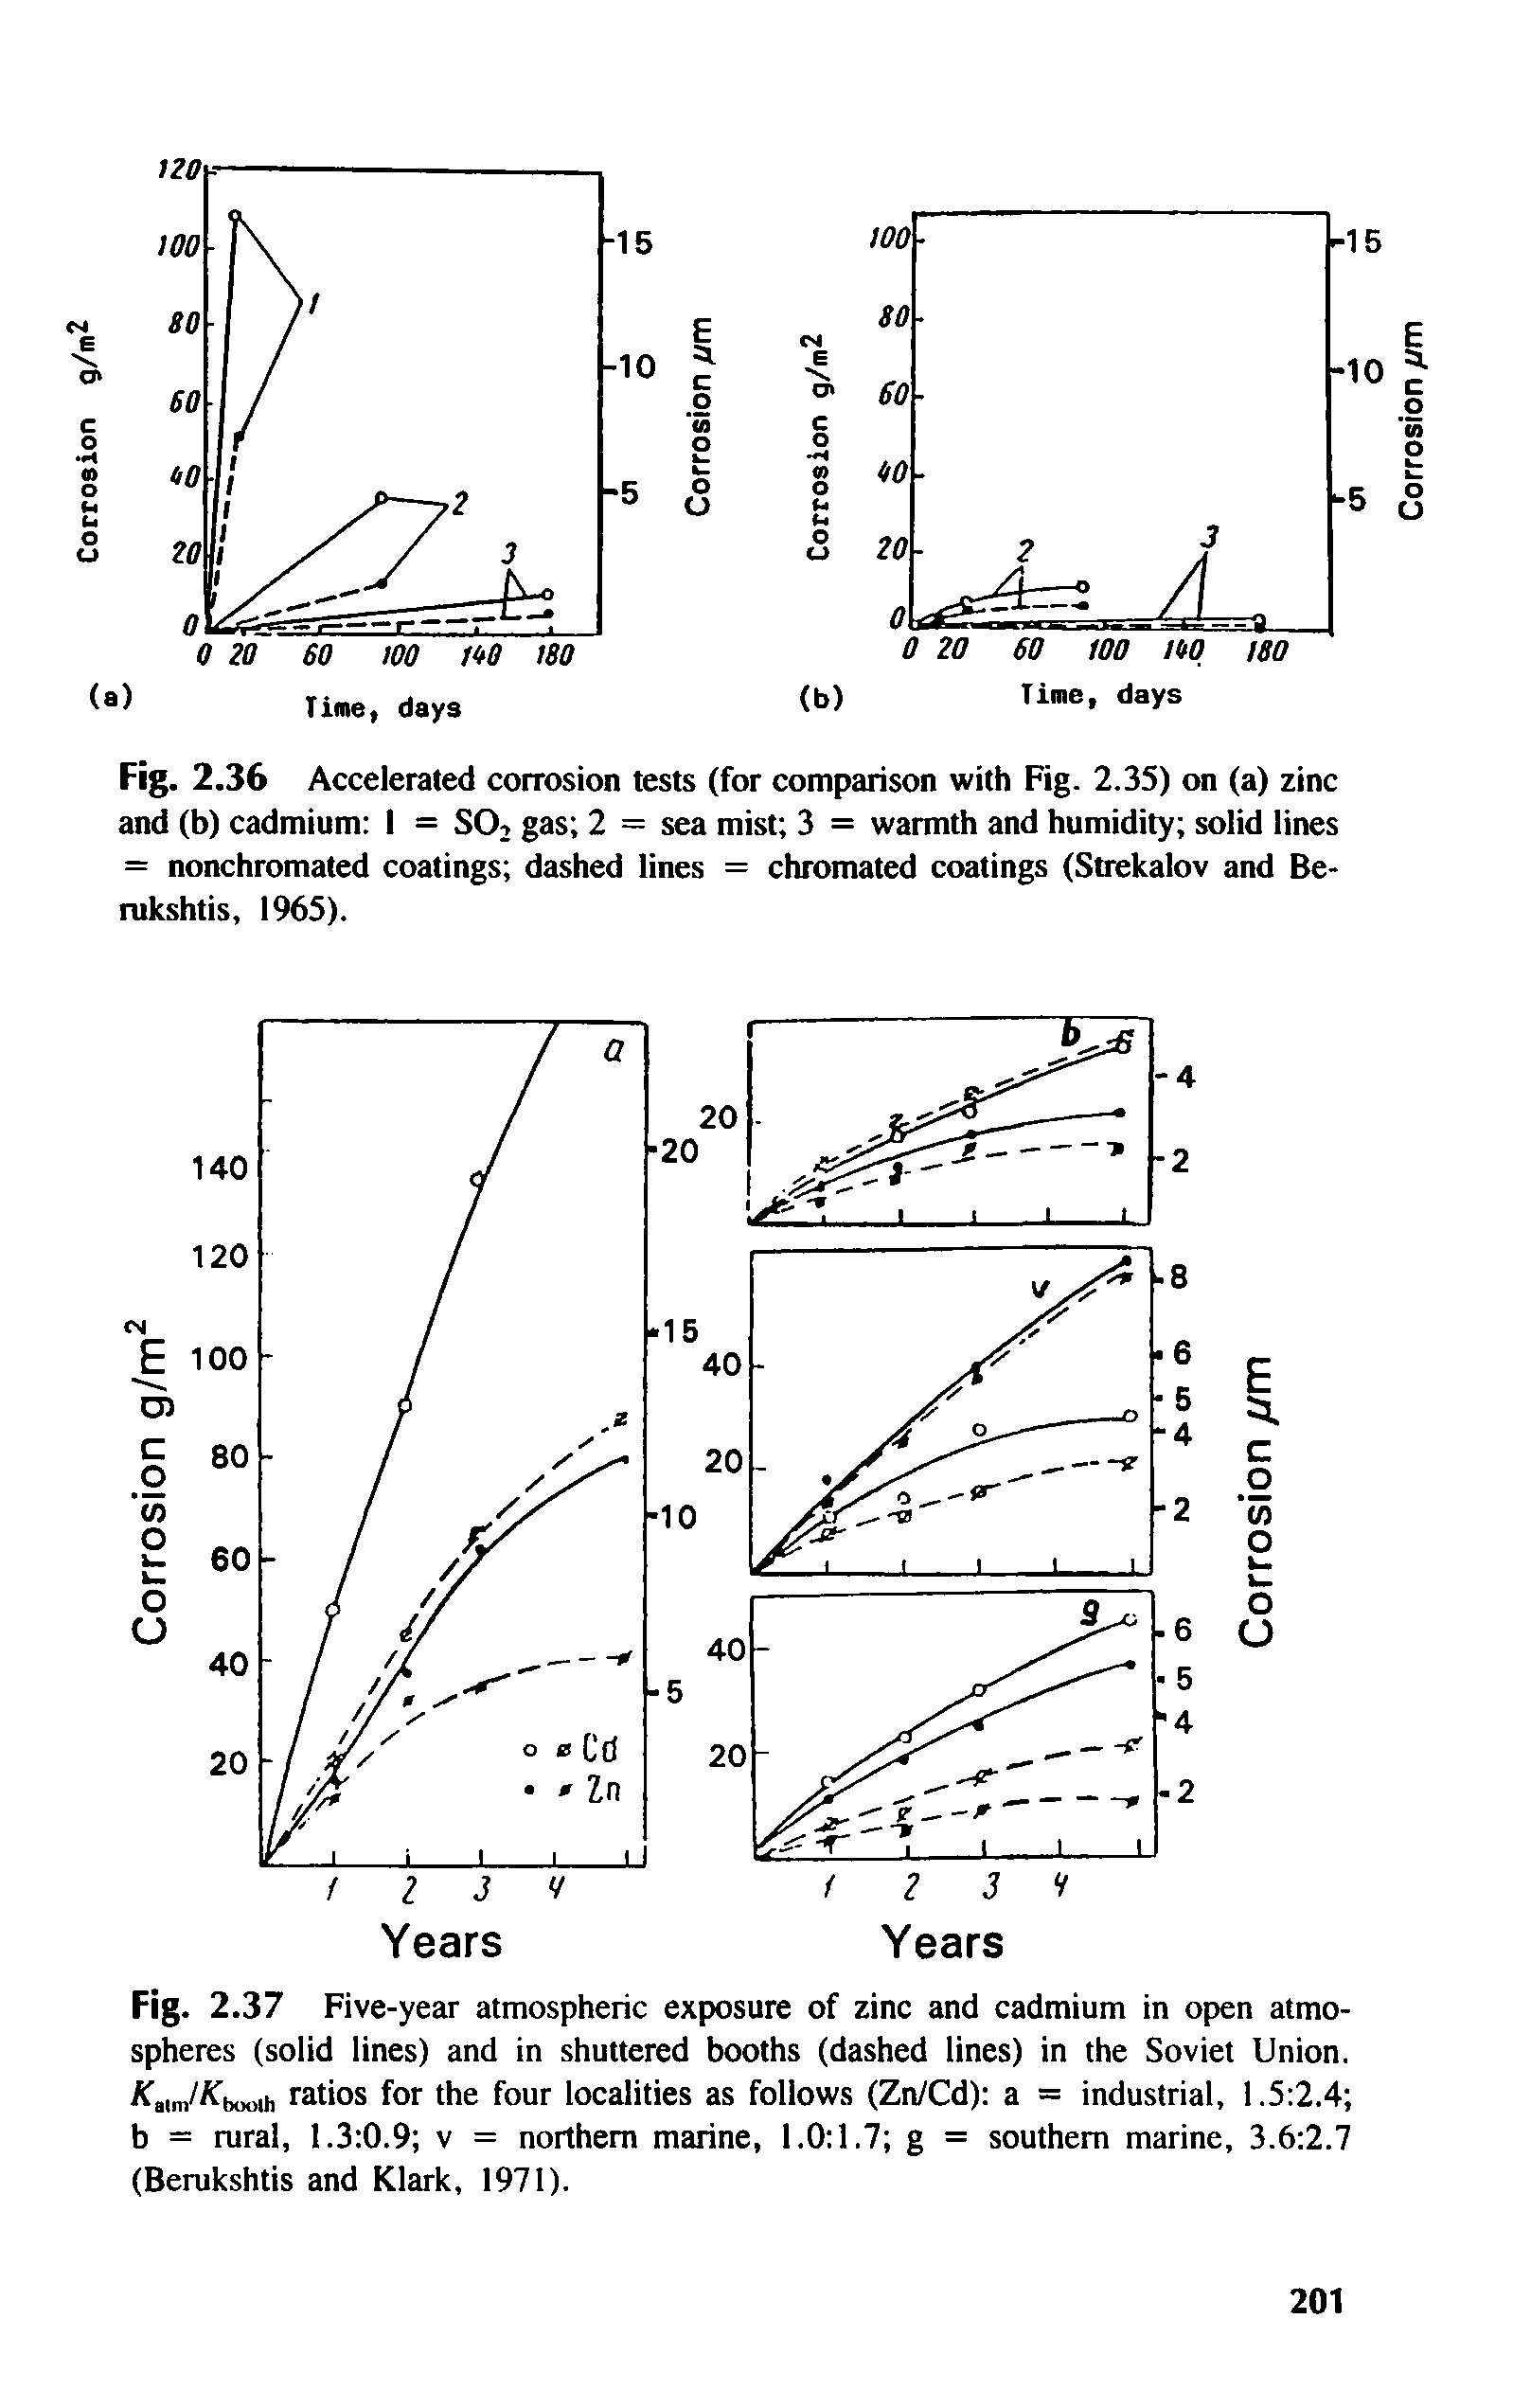 Fig. 2. 36 Accelerated corrosion tests (for comparison with Fig. 2.3S) on (a) zinc and (b) cadmium I = SO2 gas 2 = sea mist 3 = warmth and humidity solid lines = nonchromated coatings dashed lines = chromated coatings (Strekalov and Be-rukshtis, 1965).